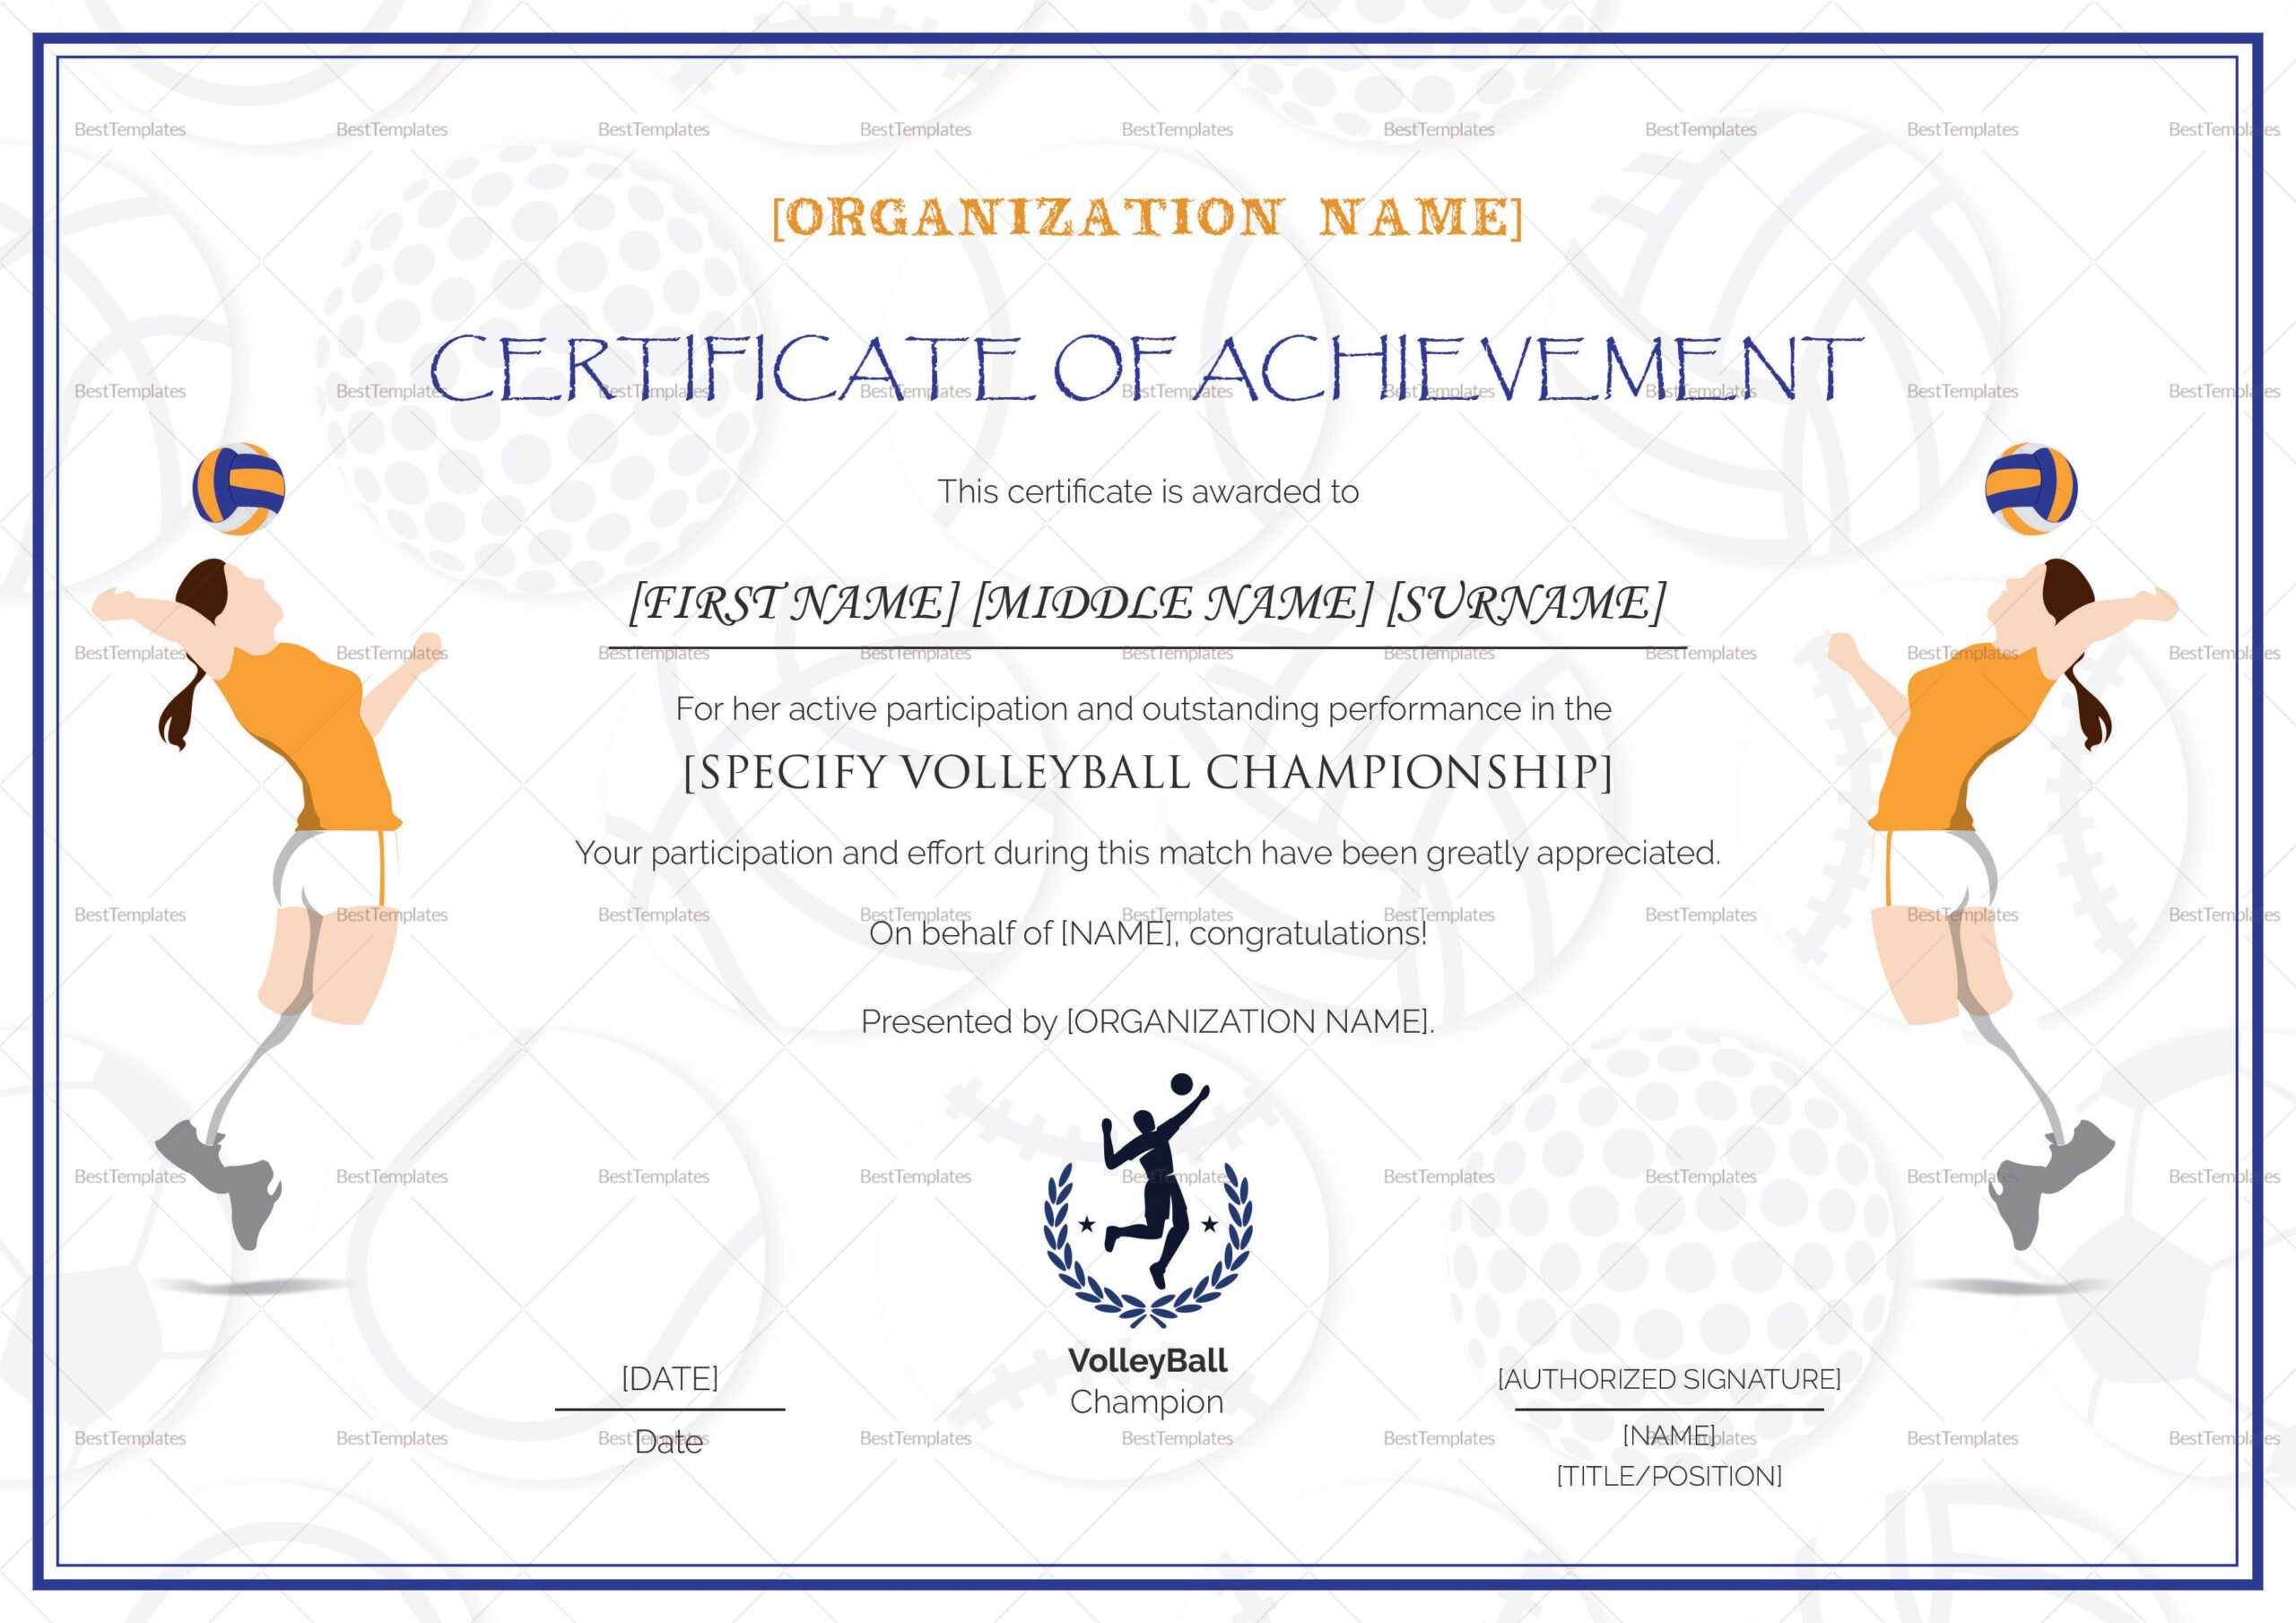 Beautiful Volleyball Certificate Templates – Superkepo Throughout Beautiful Certificate Templates